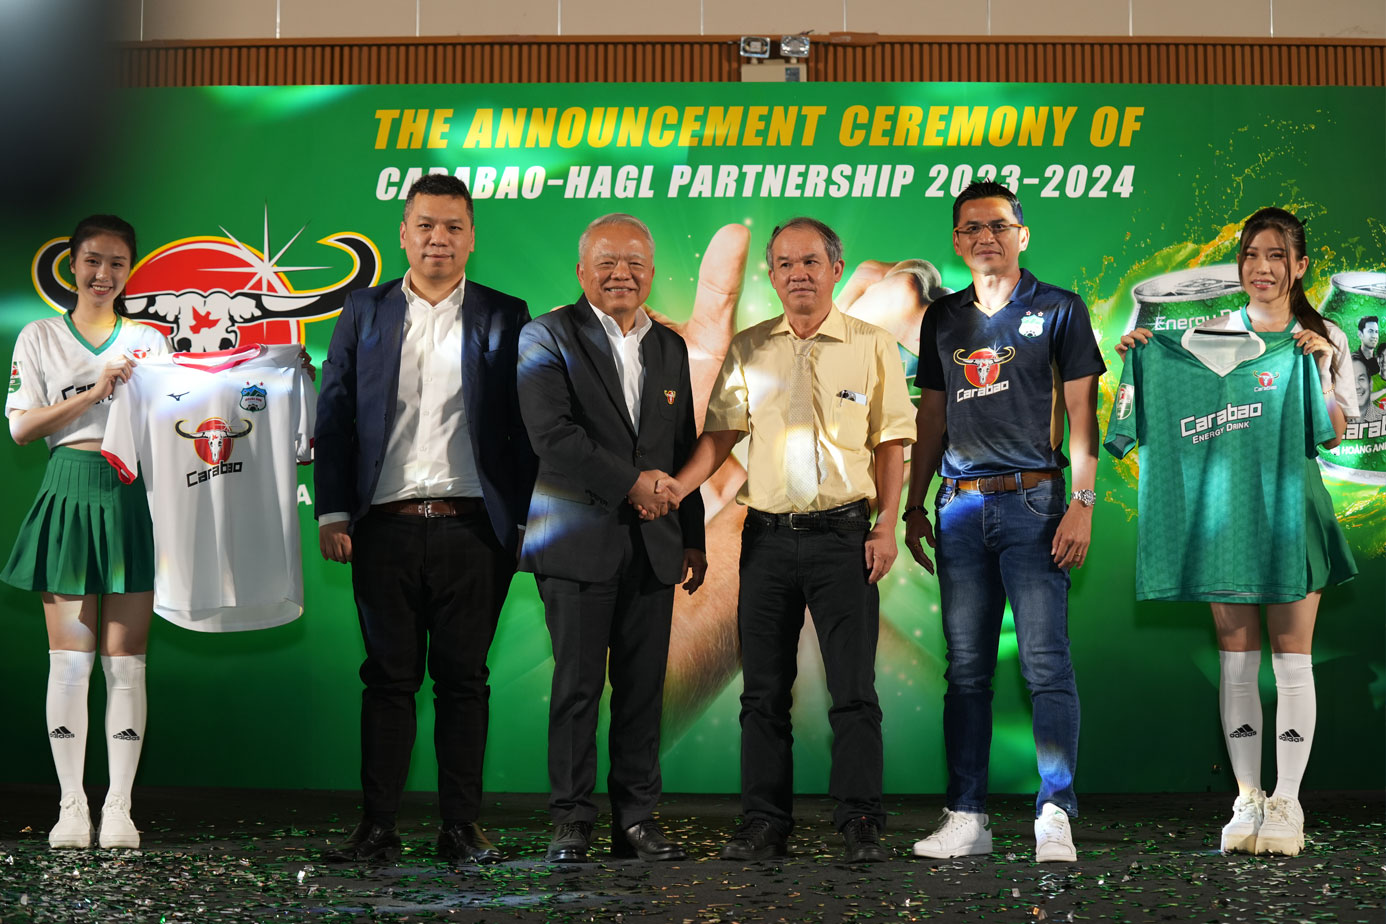 Carabao Group has entered the Vietnamese market,  partnering with the renowned football club Hoang Anh Gia Lai in its mission to further develop football in the region and to build a truly global brand